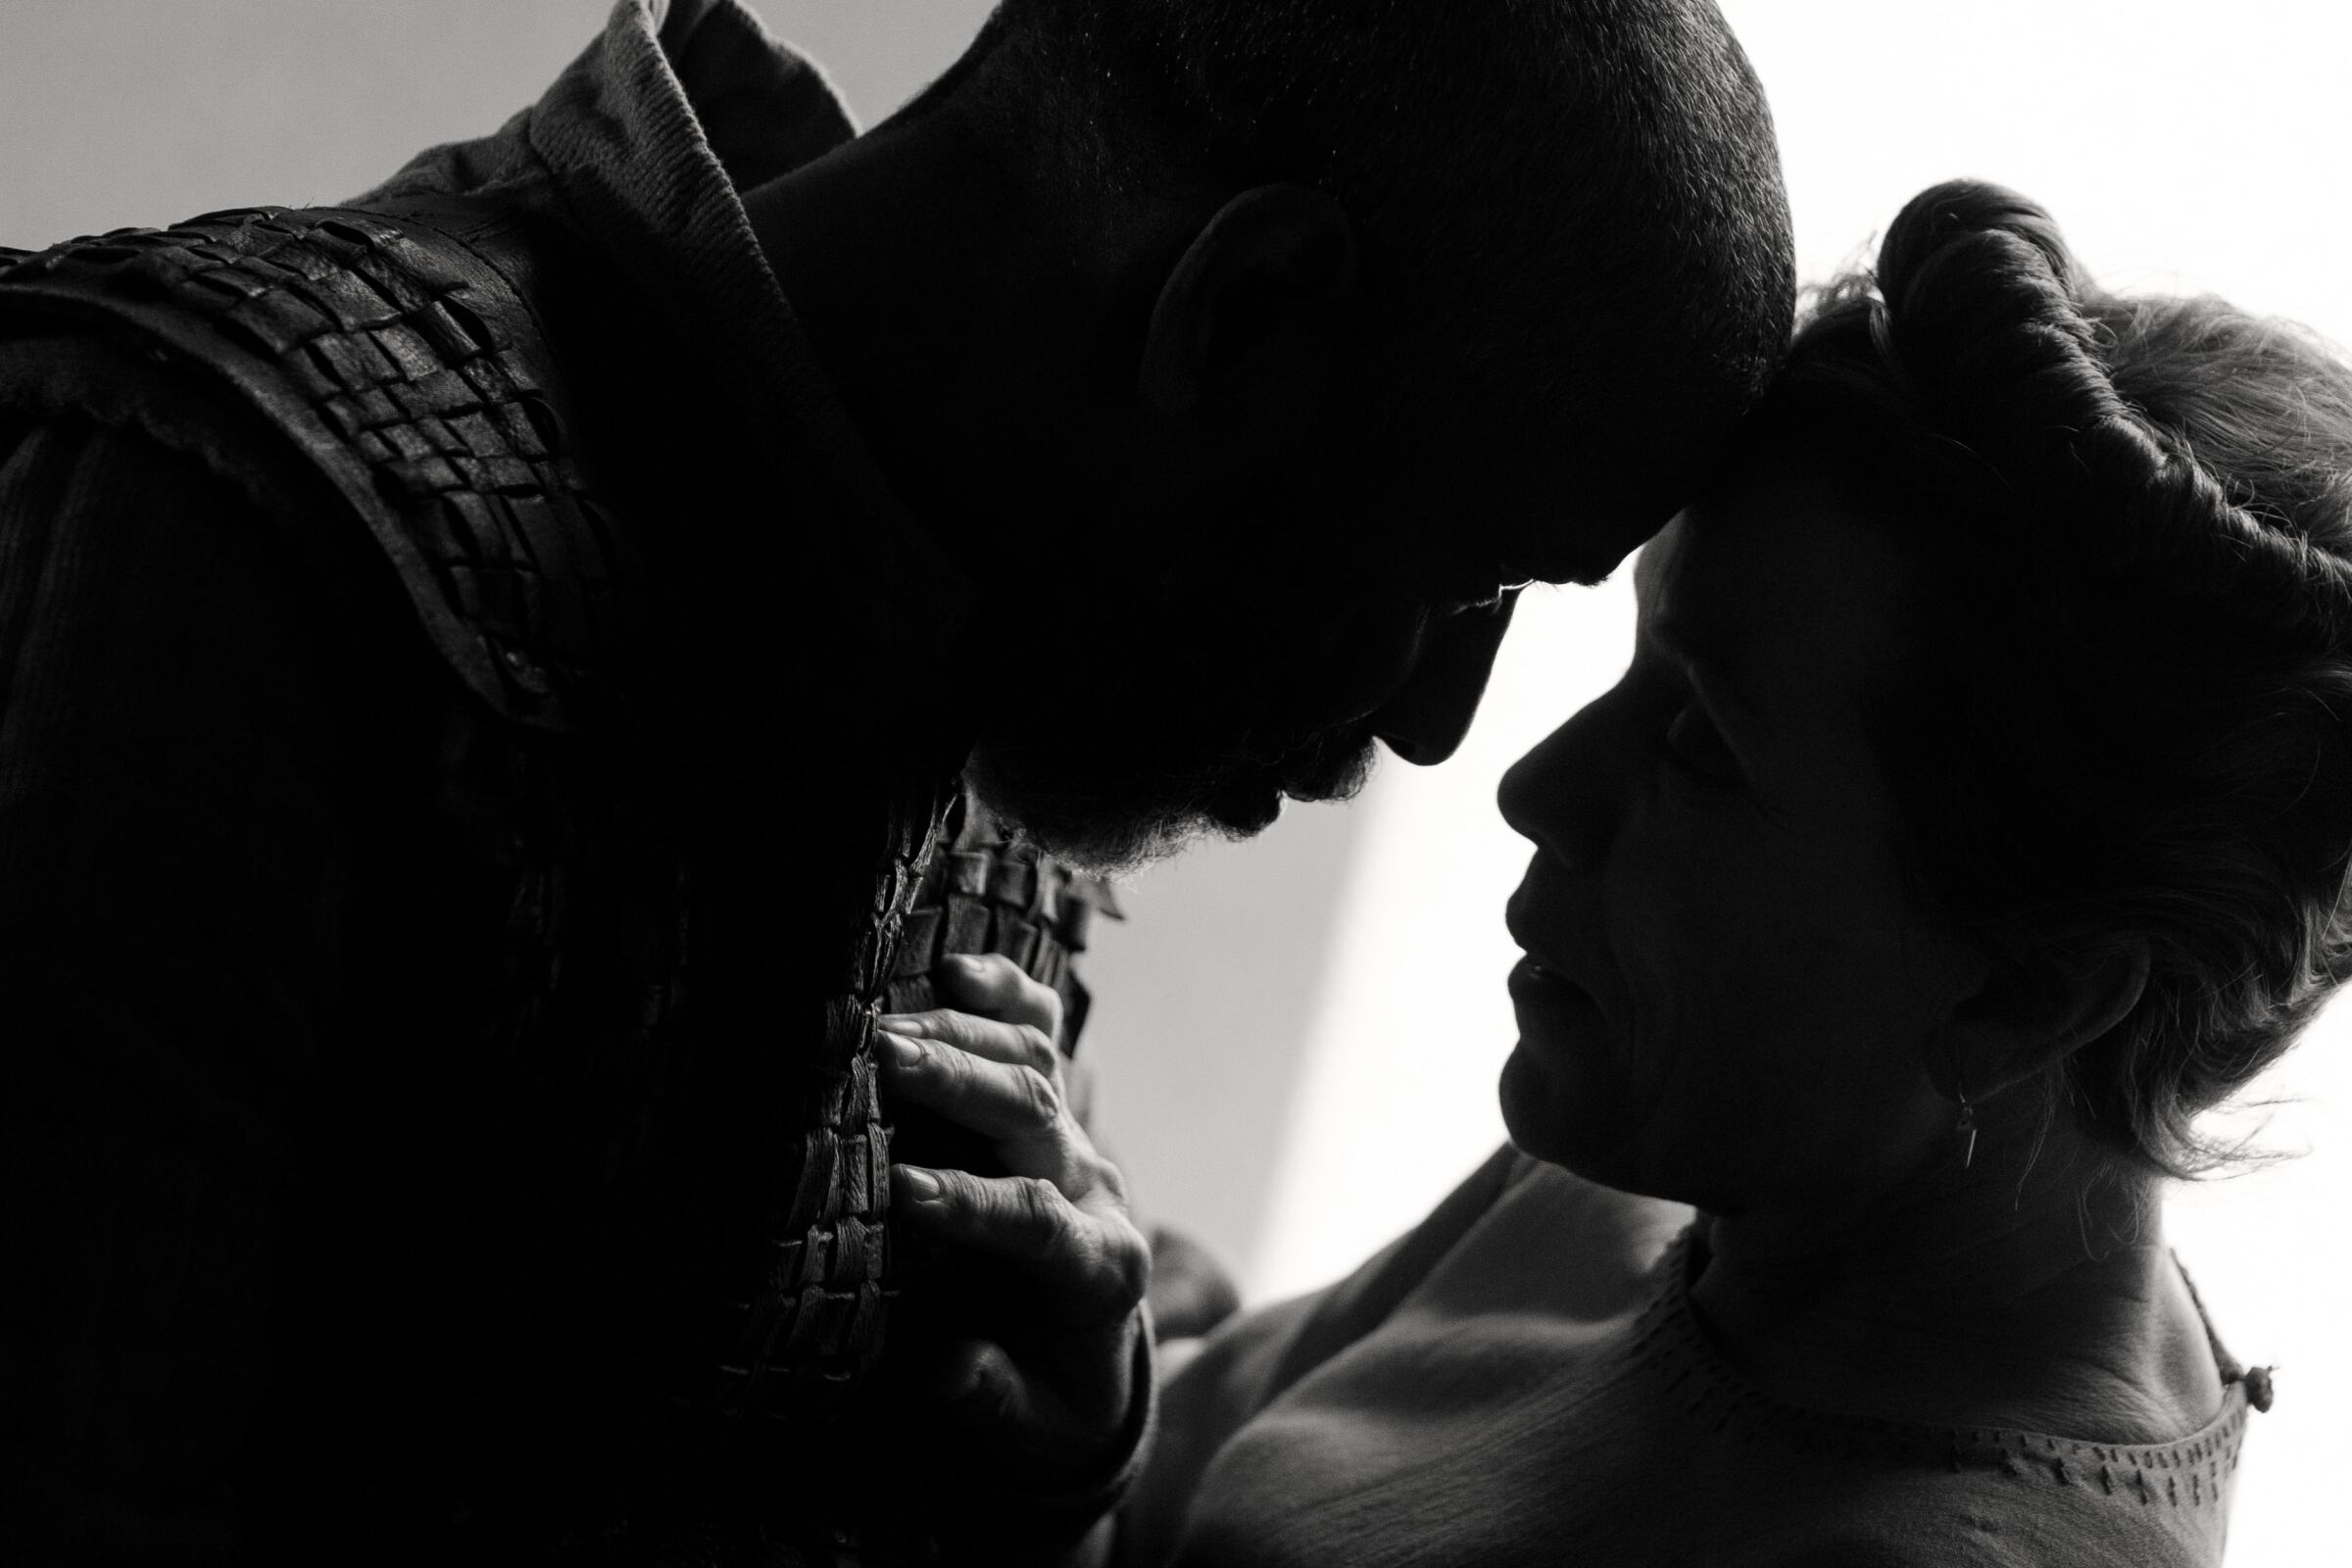 A man and woman in Macbeth clothes touch foreheads